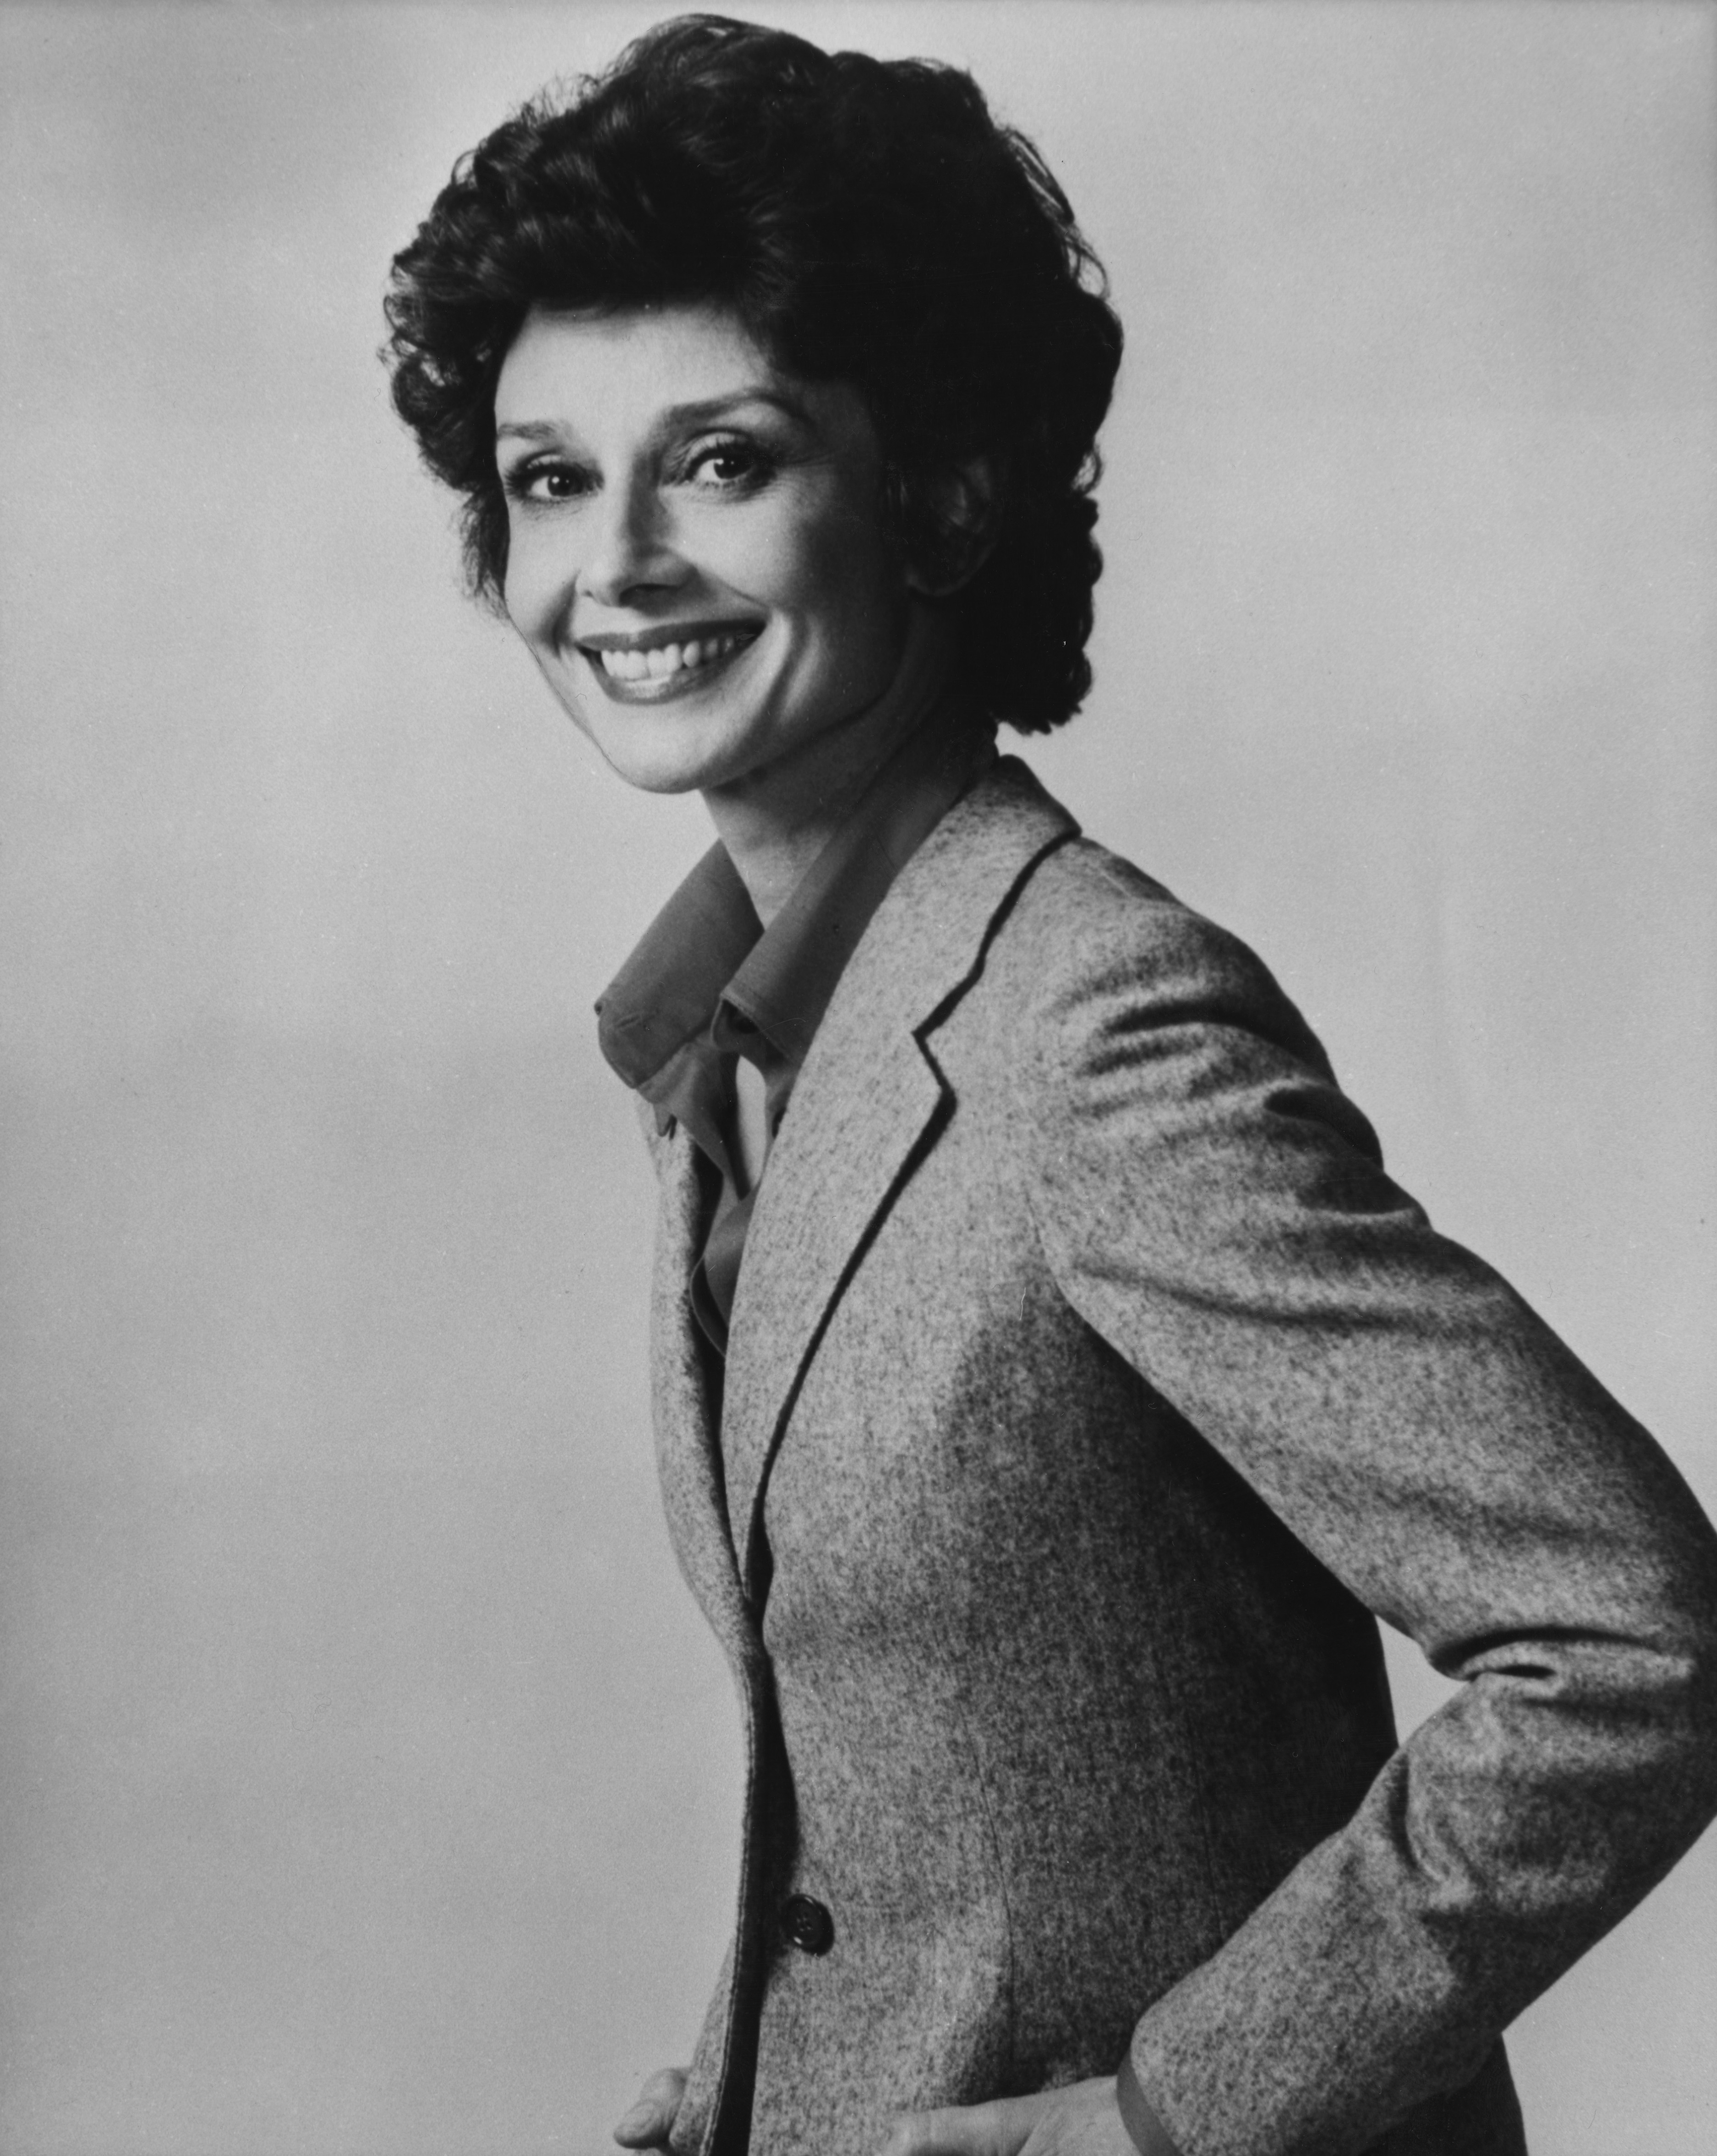 Annette Funicello poses in a classic blazer and blouse with a confident smile